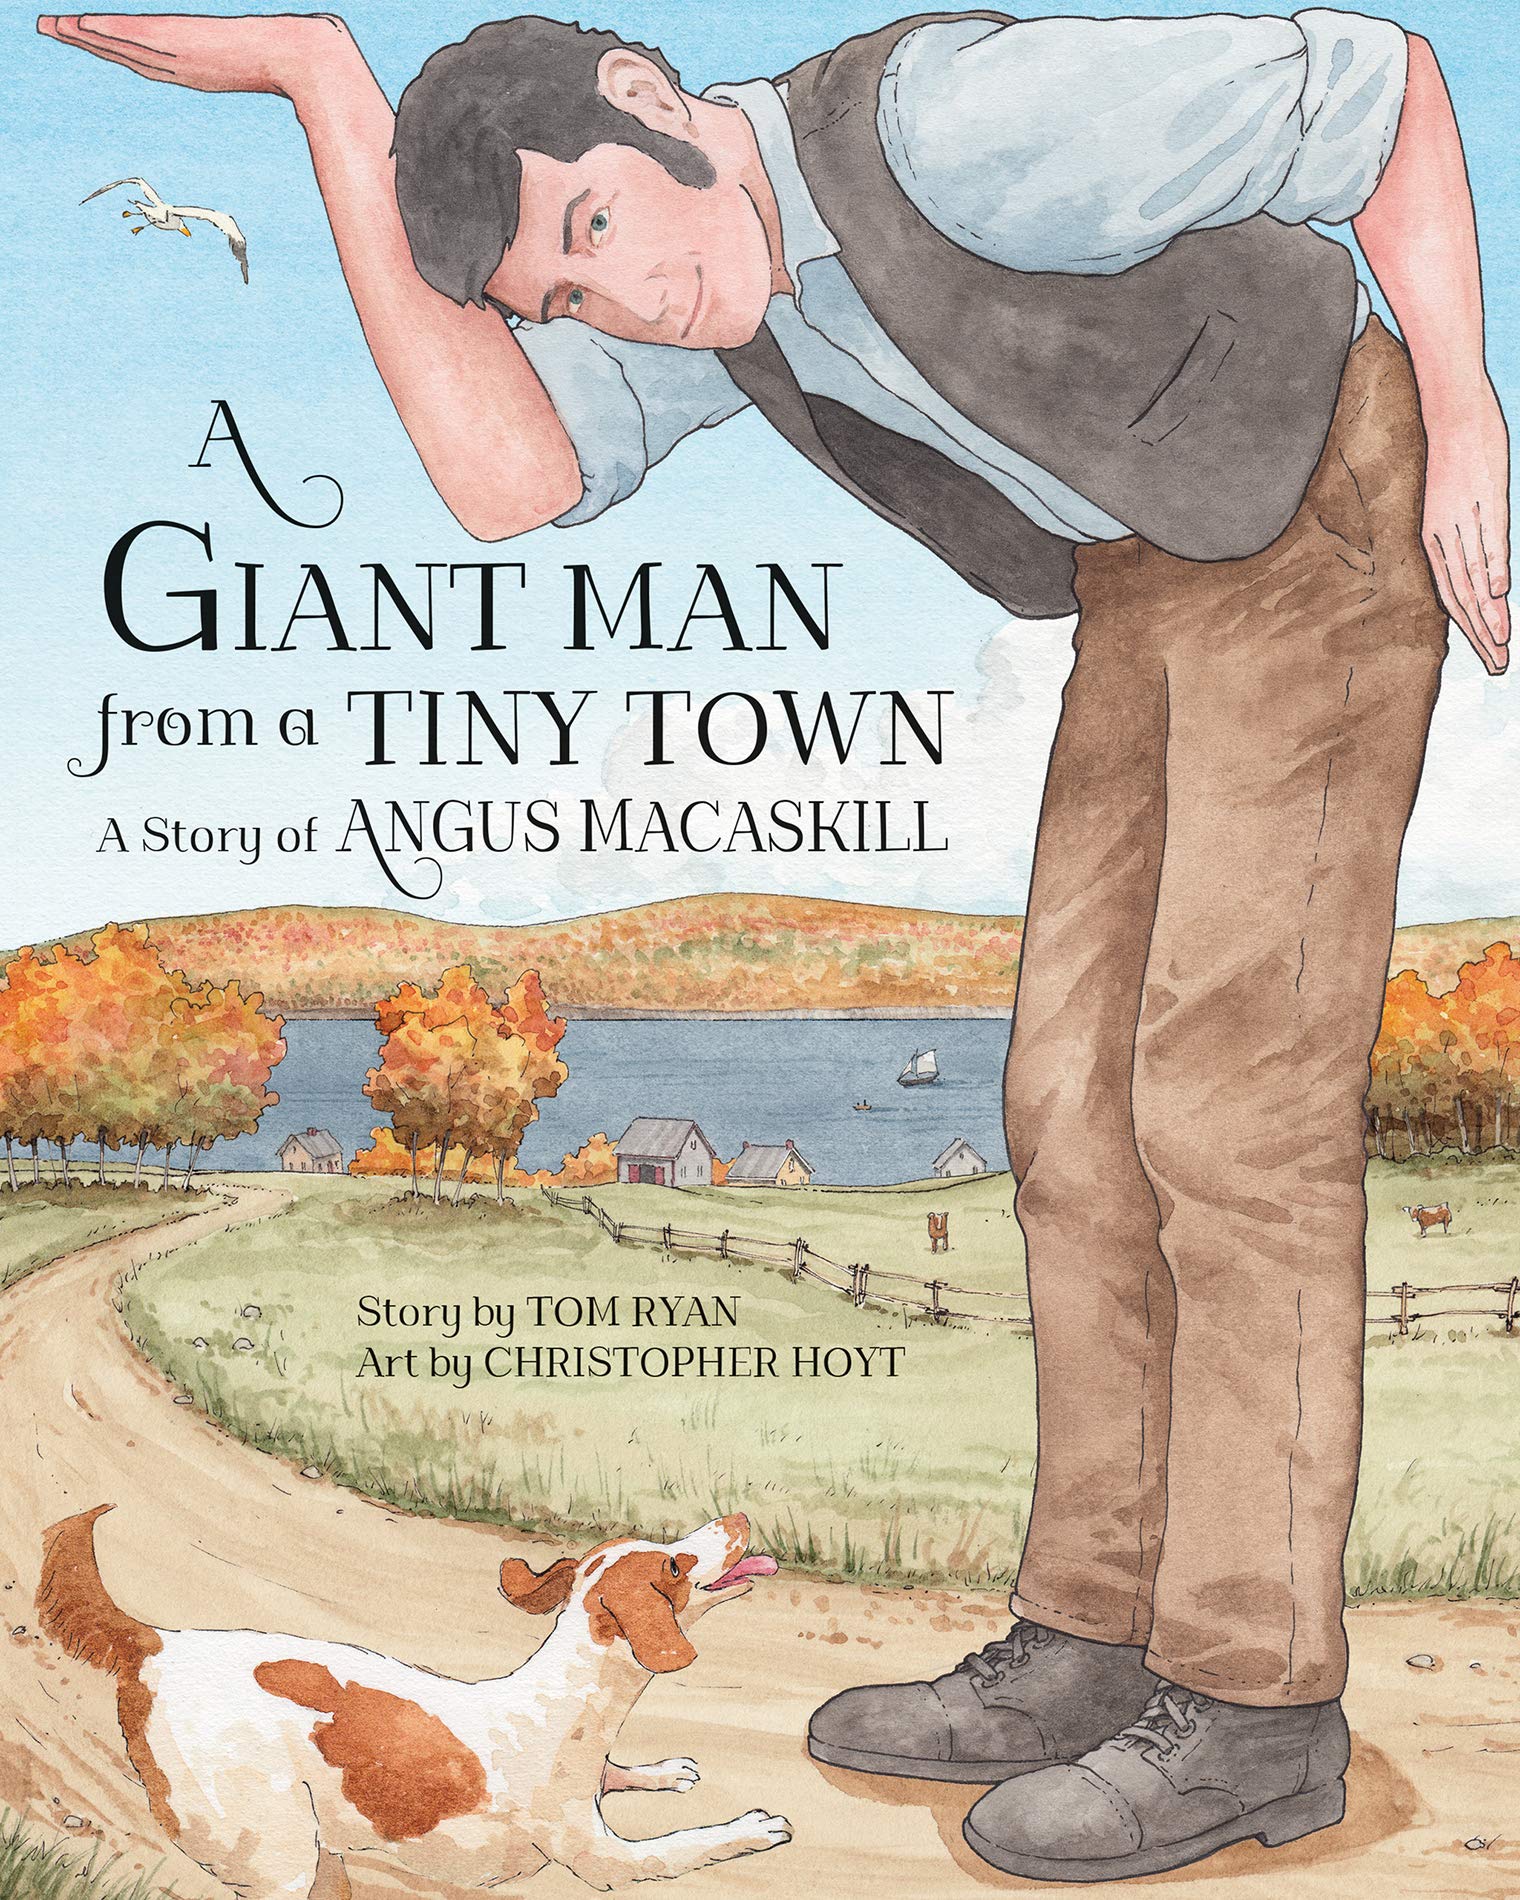 A Giant Man from a Tiny Town: A Story of Angus MacAskill